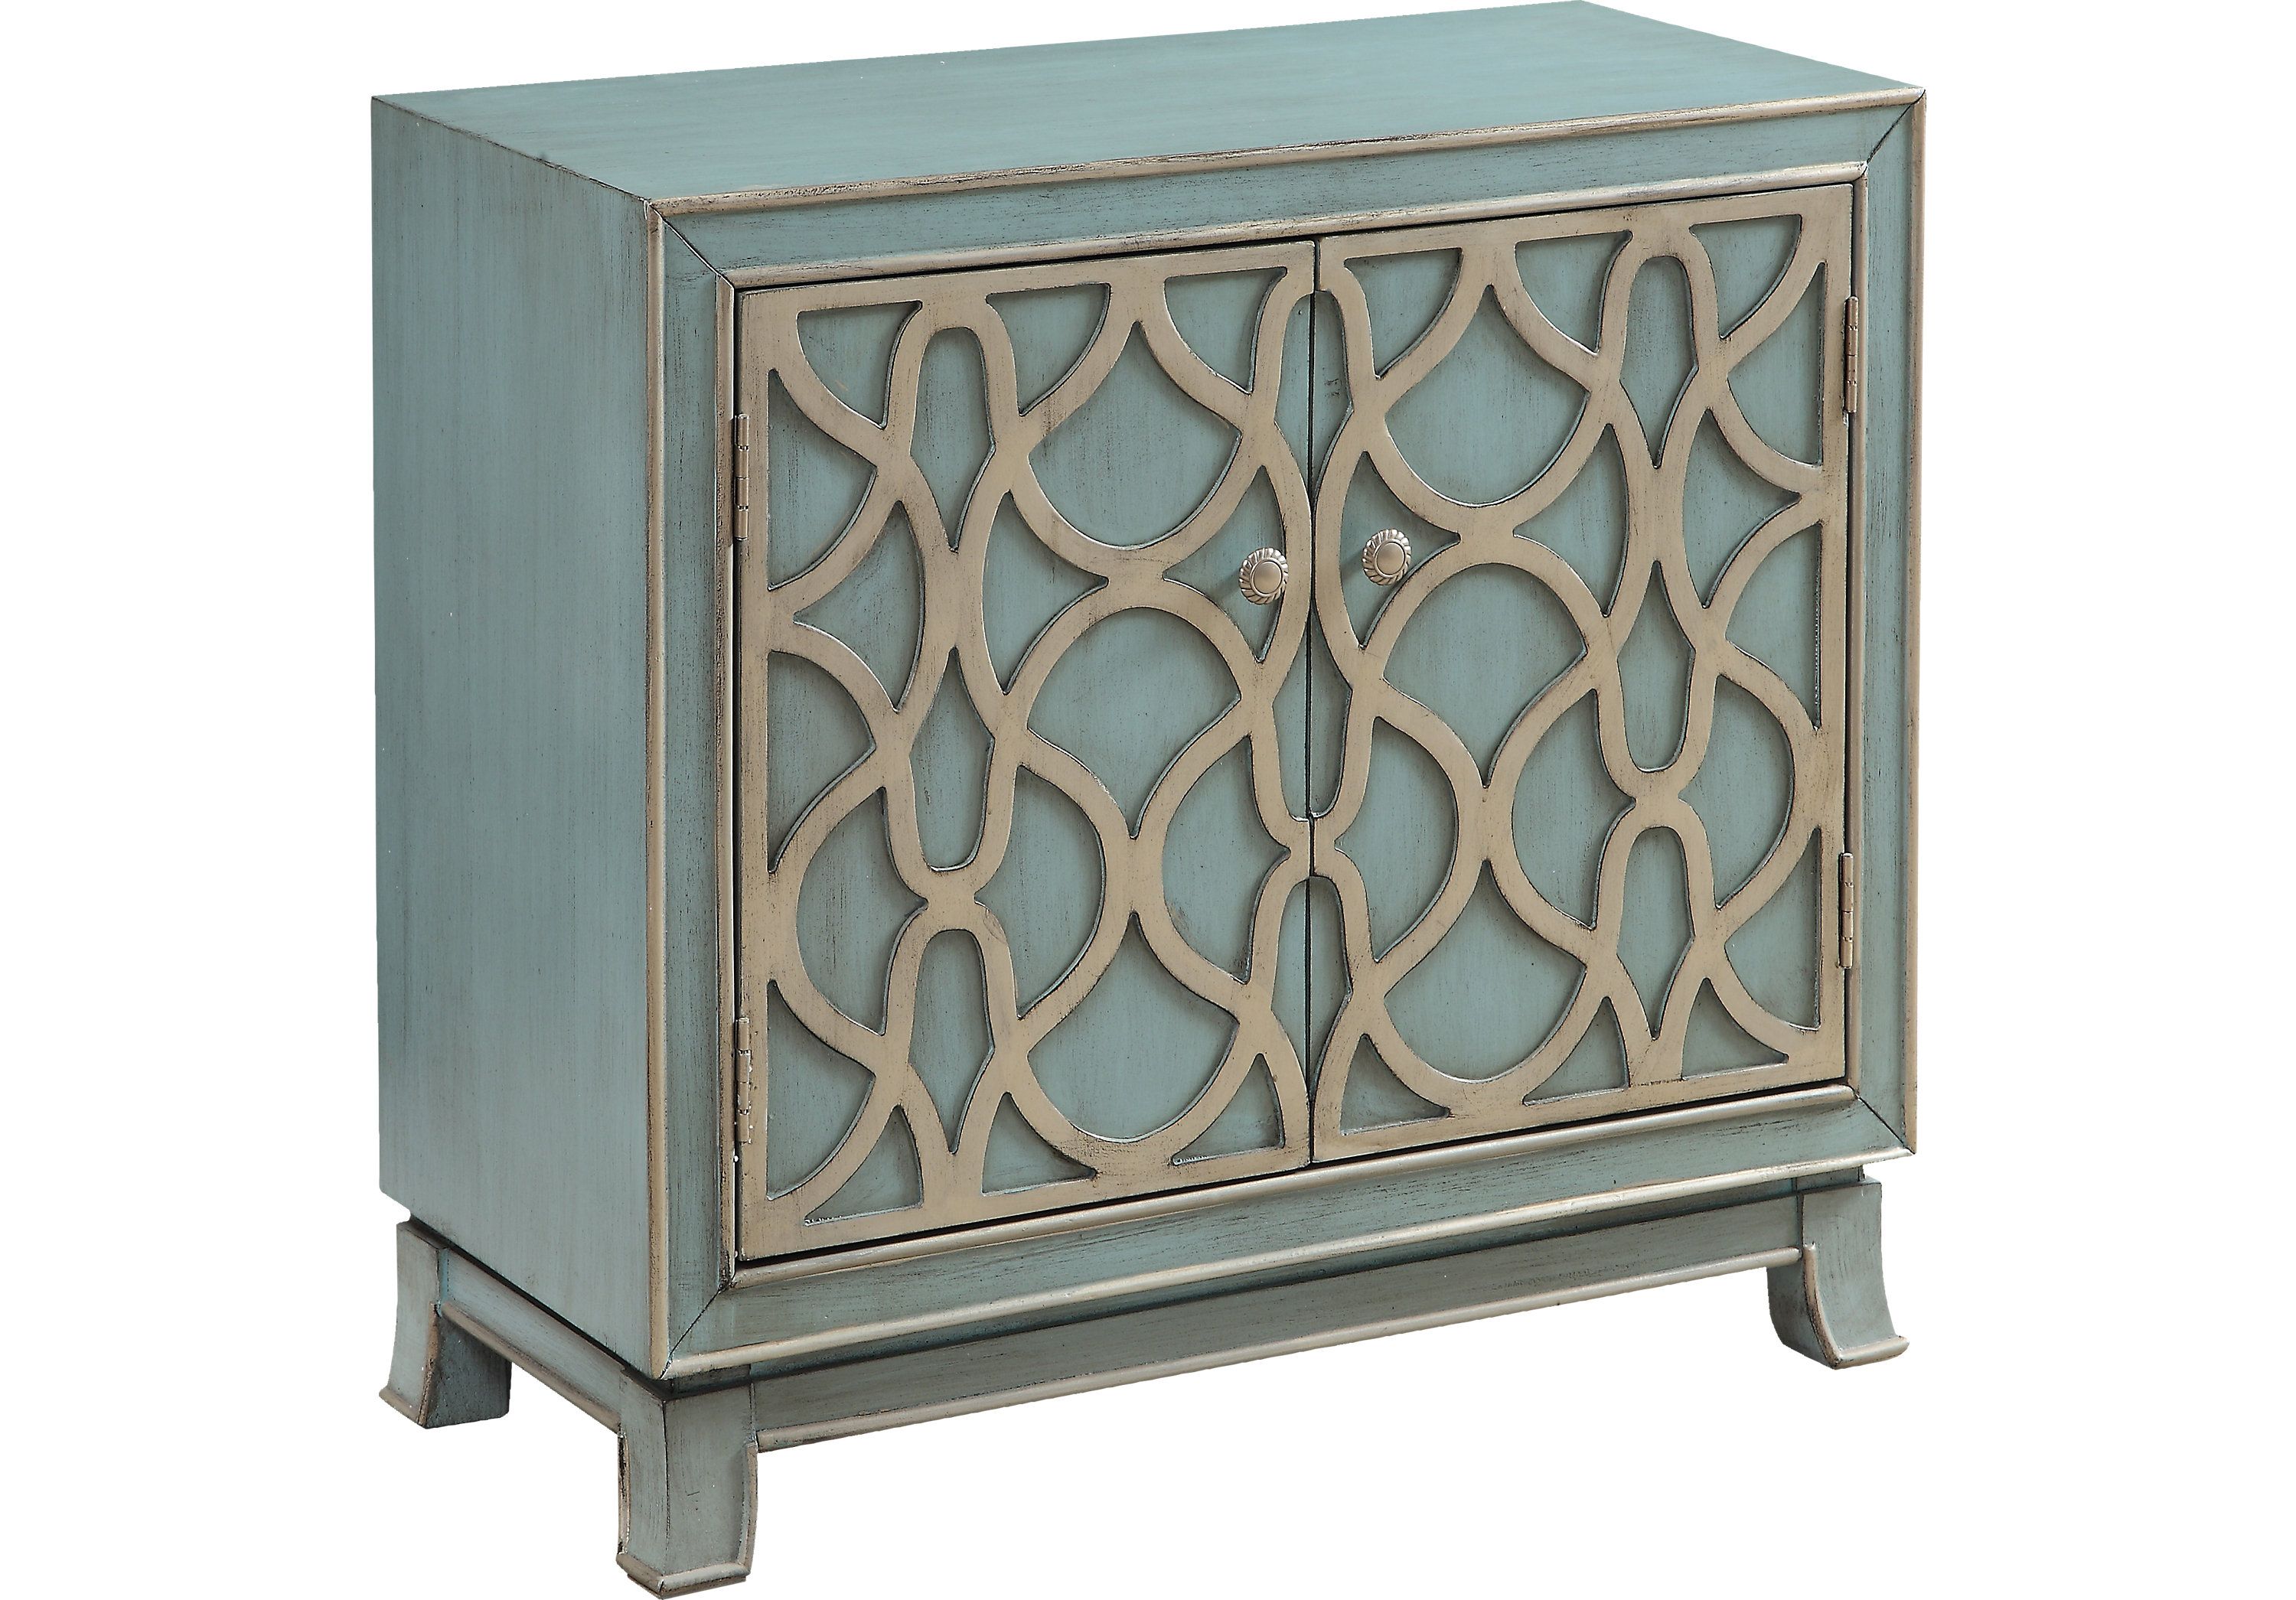 marion mint accent cabinet clarissa metal table cabinets colors leather drum stool coffee styling windham door gray wooden legs beach theme decor animal lamp office floor lamps